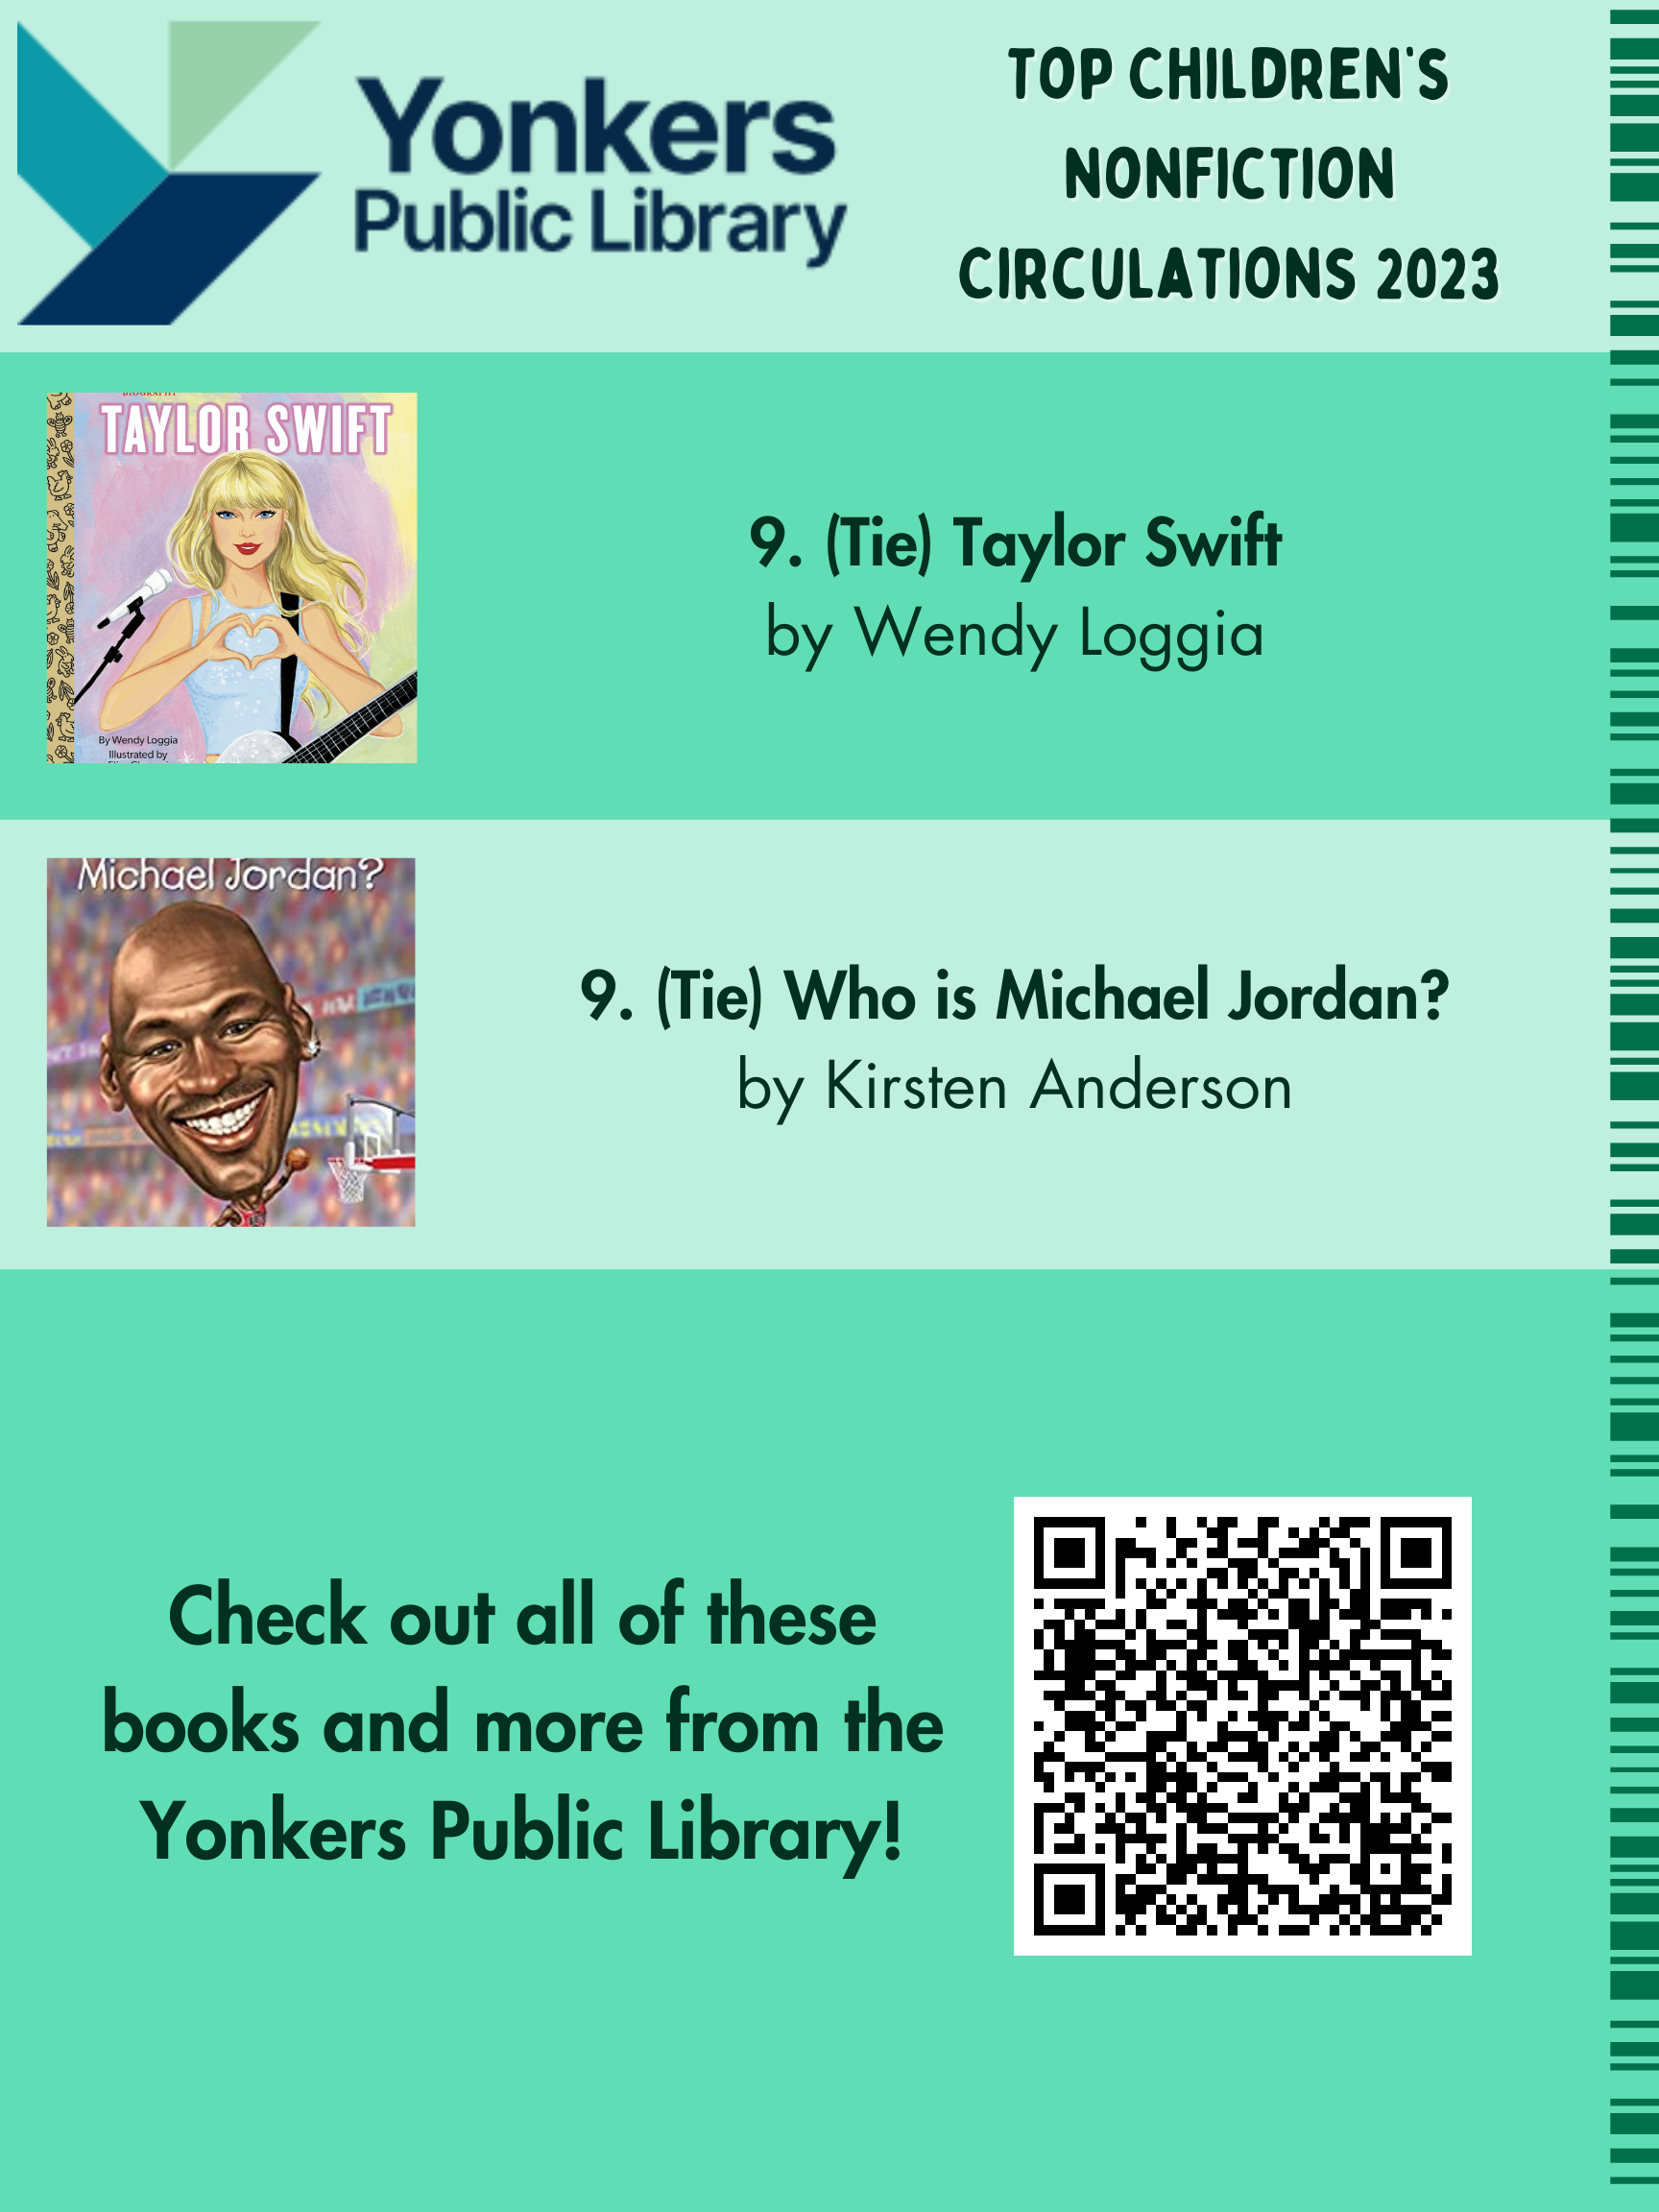 Children's Top Nonfiction Circulations 2023. Taylor Swift and Who Was Michael Jordan.